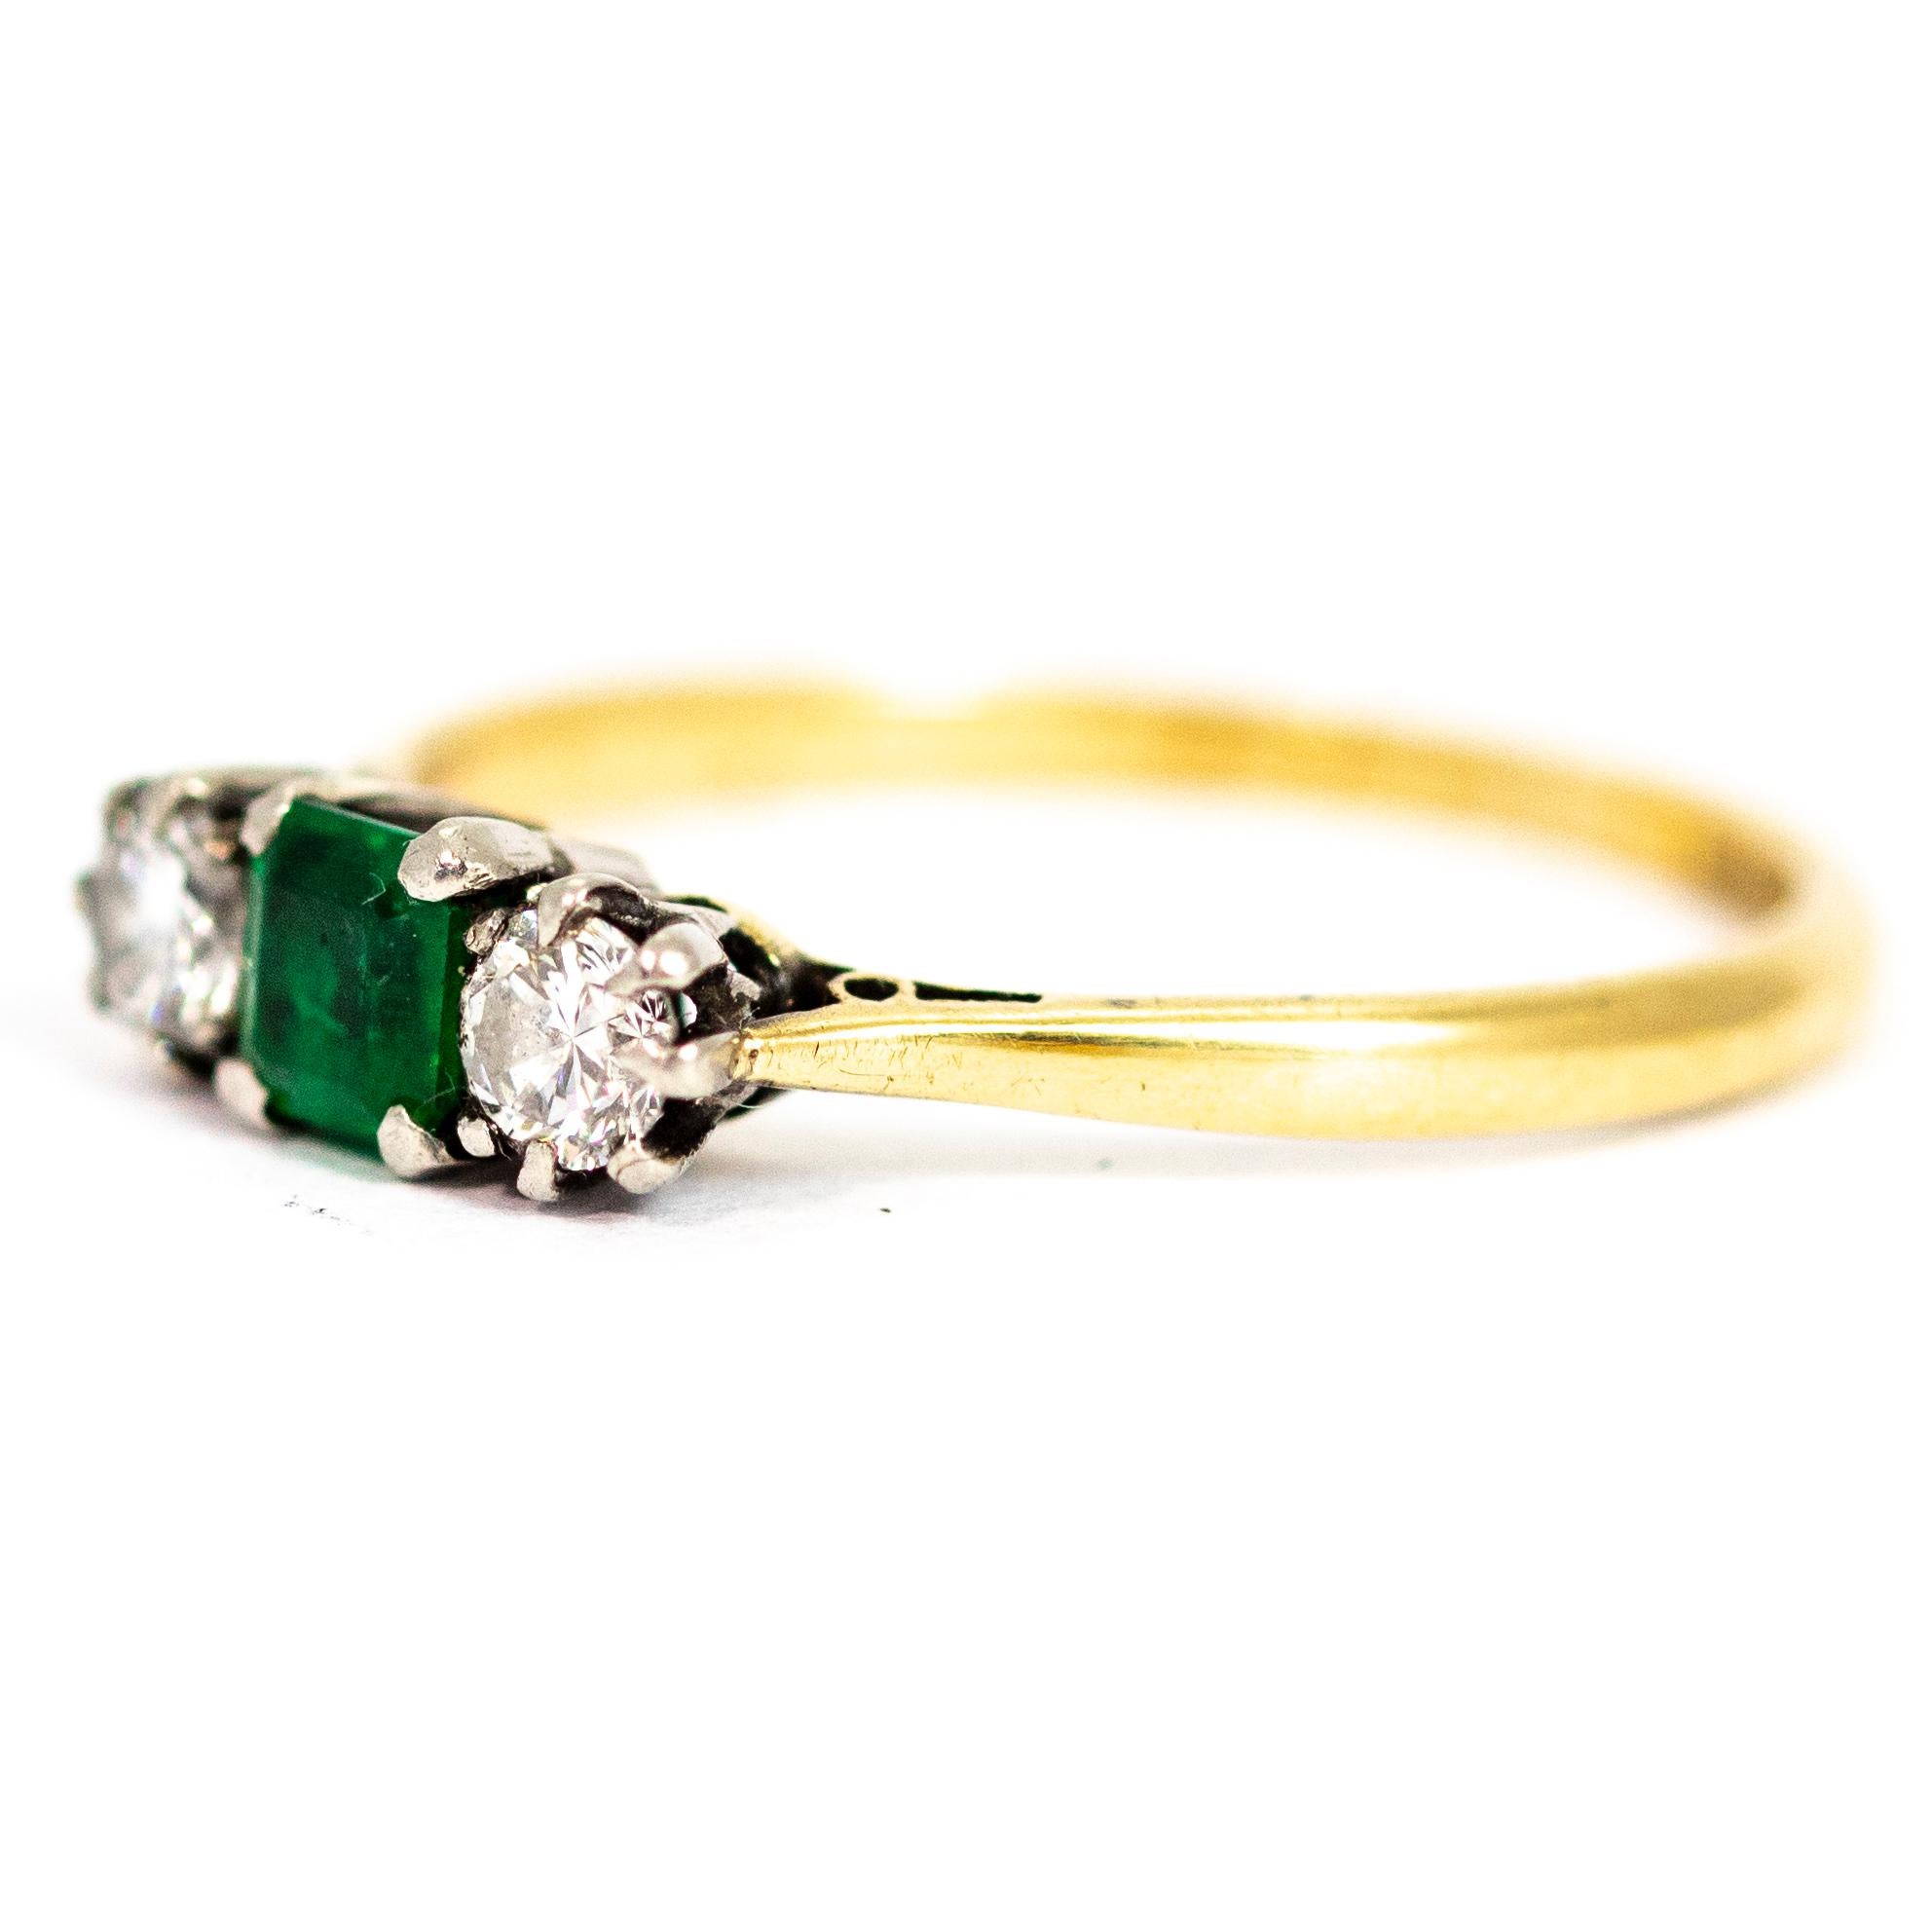 This there stone ring holds a square cut emerald at the centre which measures approximately .33pts. Either side of the beautiful bright green stone sit a sparkling diamond measuring approximately .15pts. The stones themselves are set in platinum and